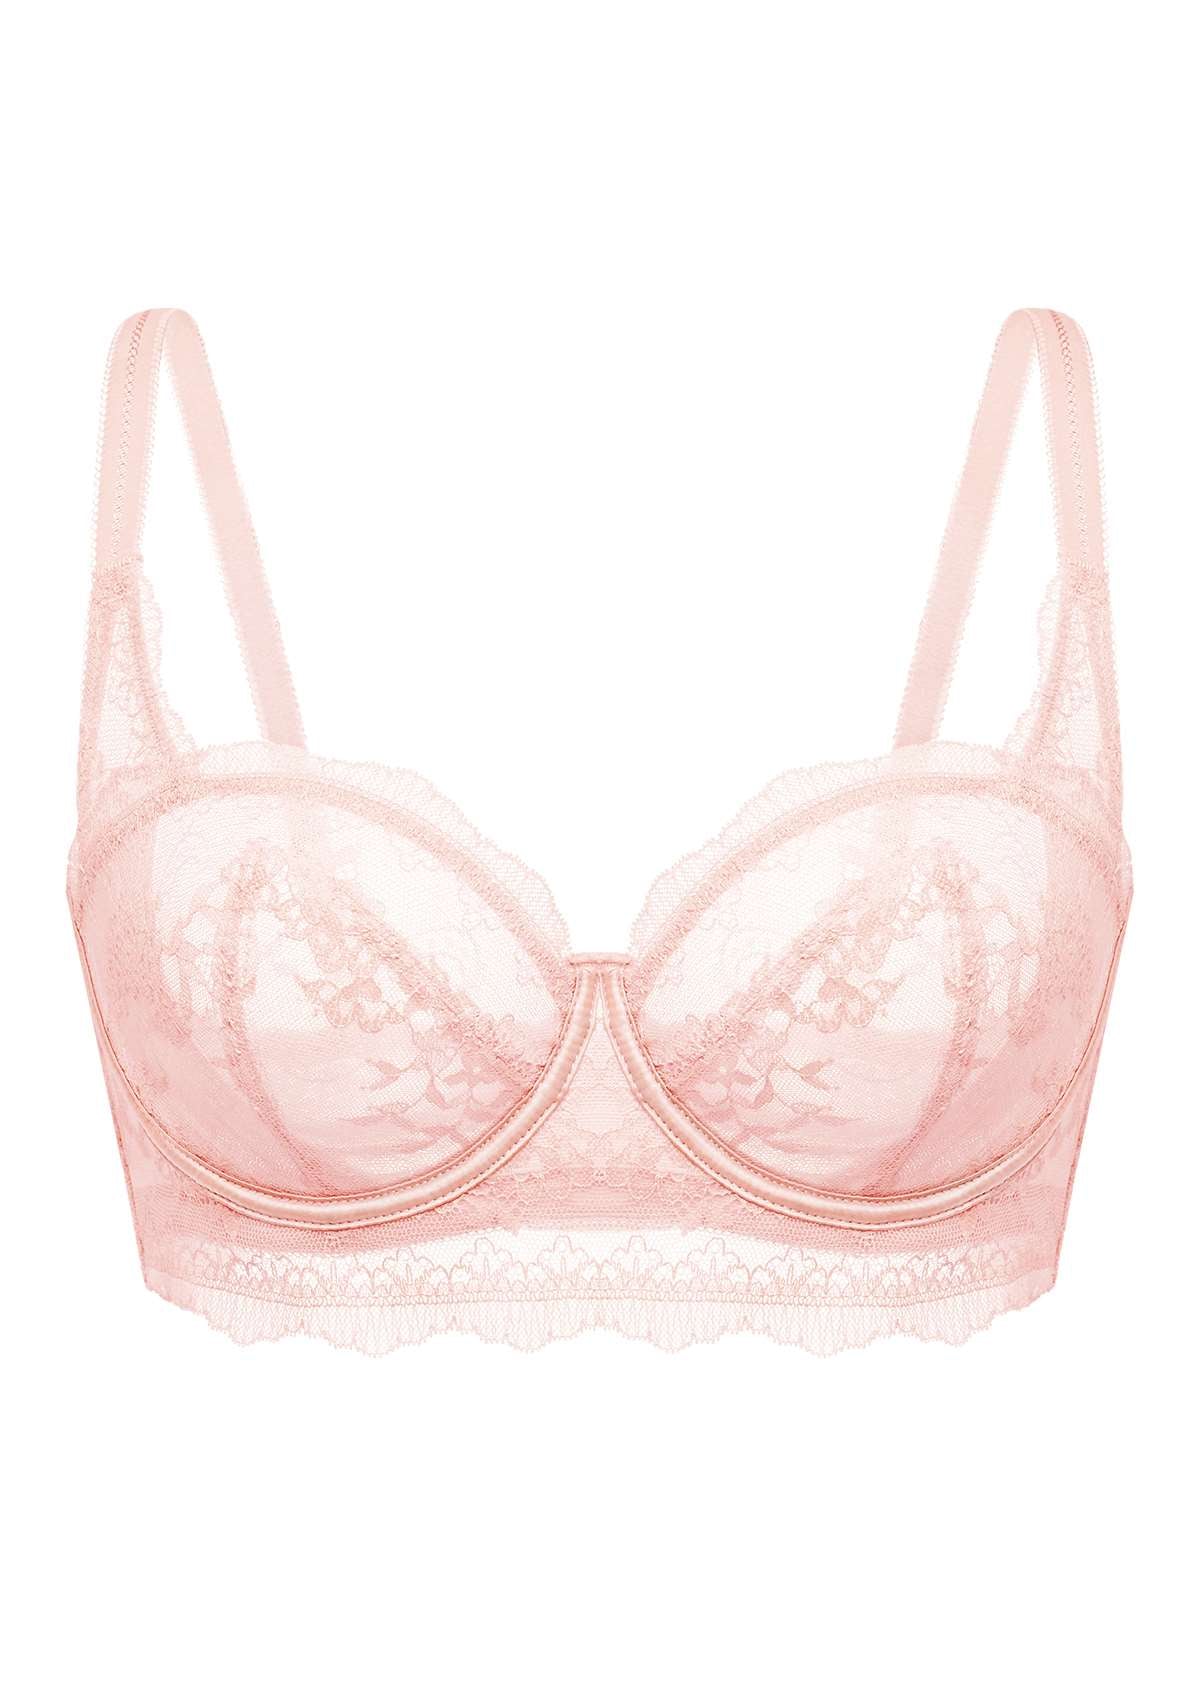 HSIA Floral Lace Unlined Bridal Balconette Delicate Bra Panty Set - Pink / 38 / DDD/F